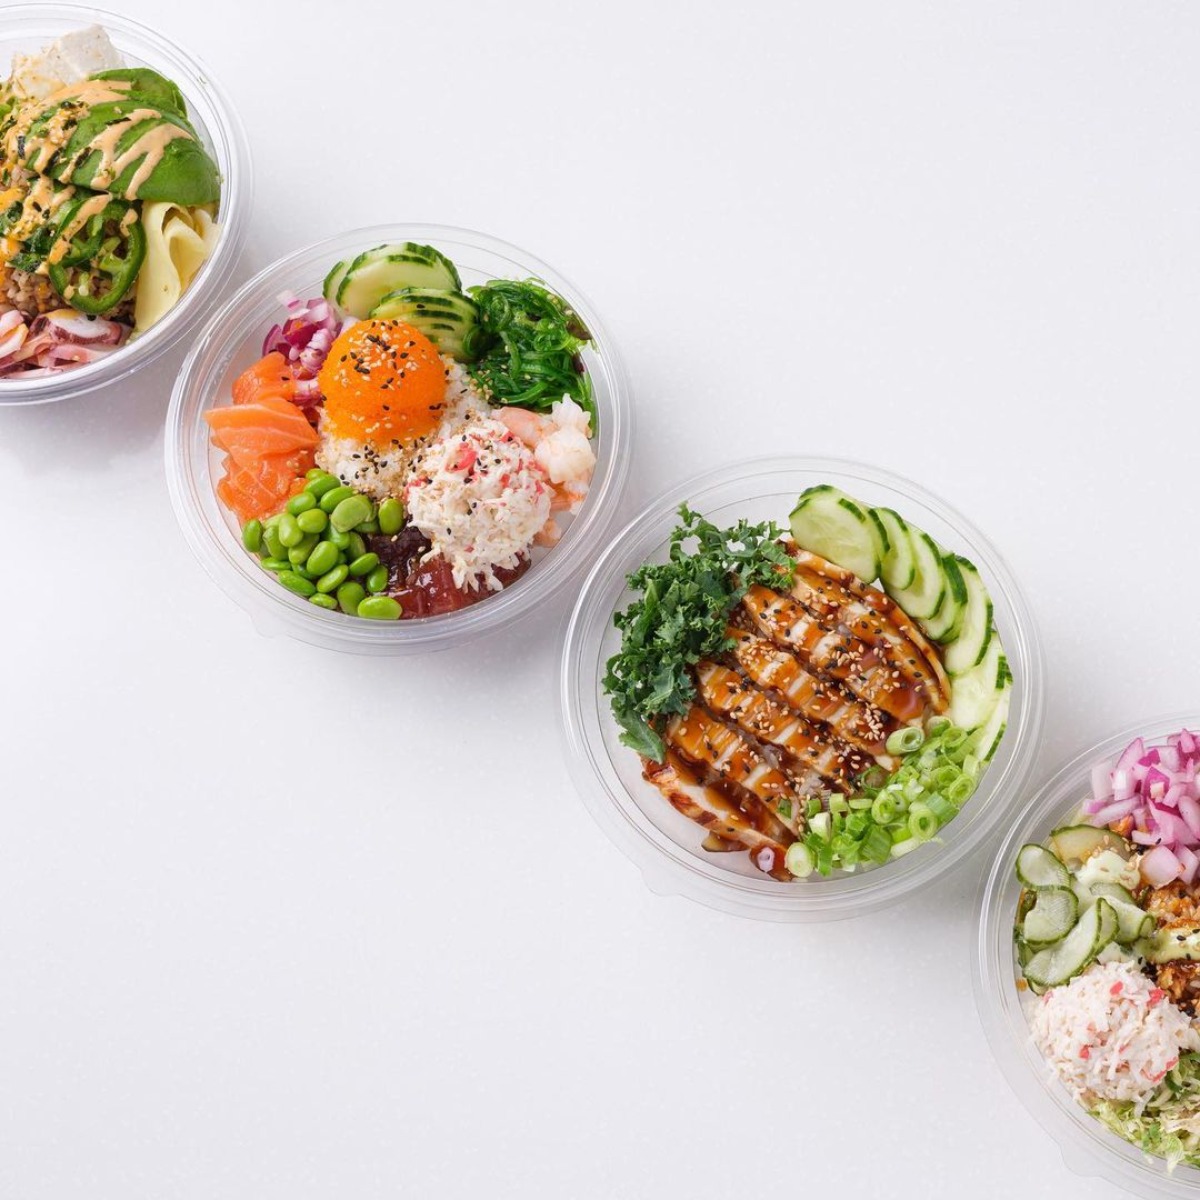 Koibito Poke Looking to Add Locations in Los Angeles and Beyond